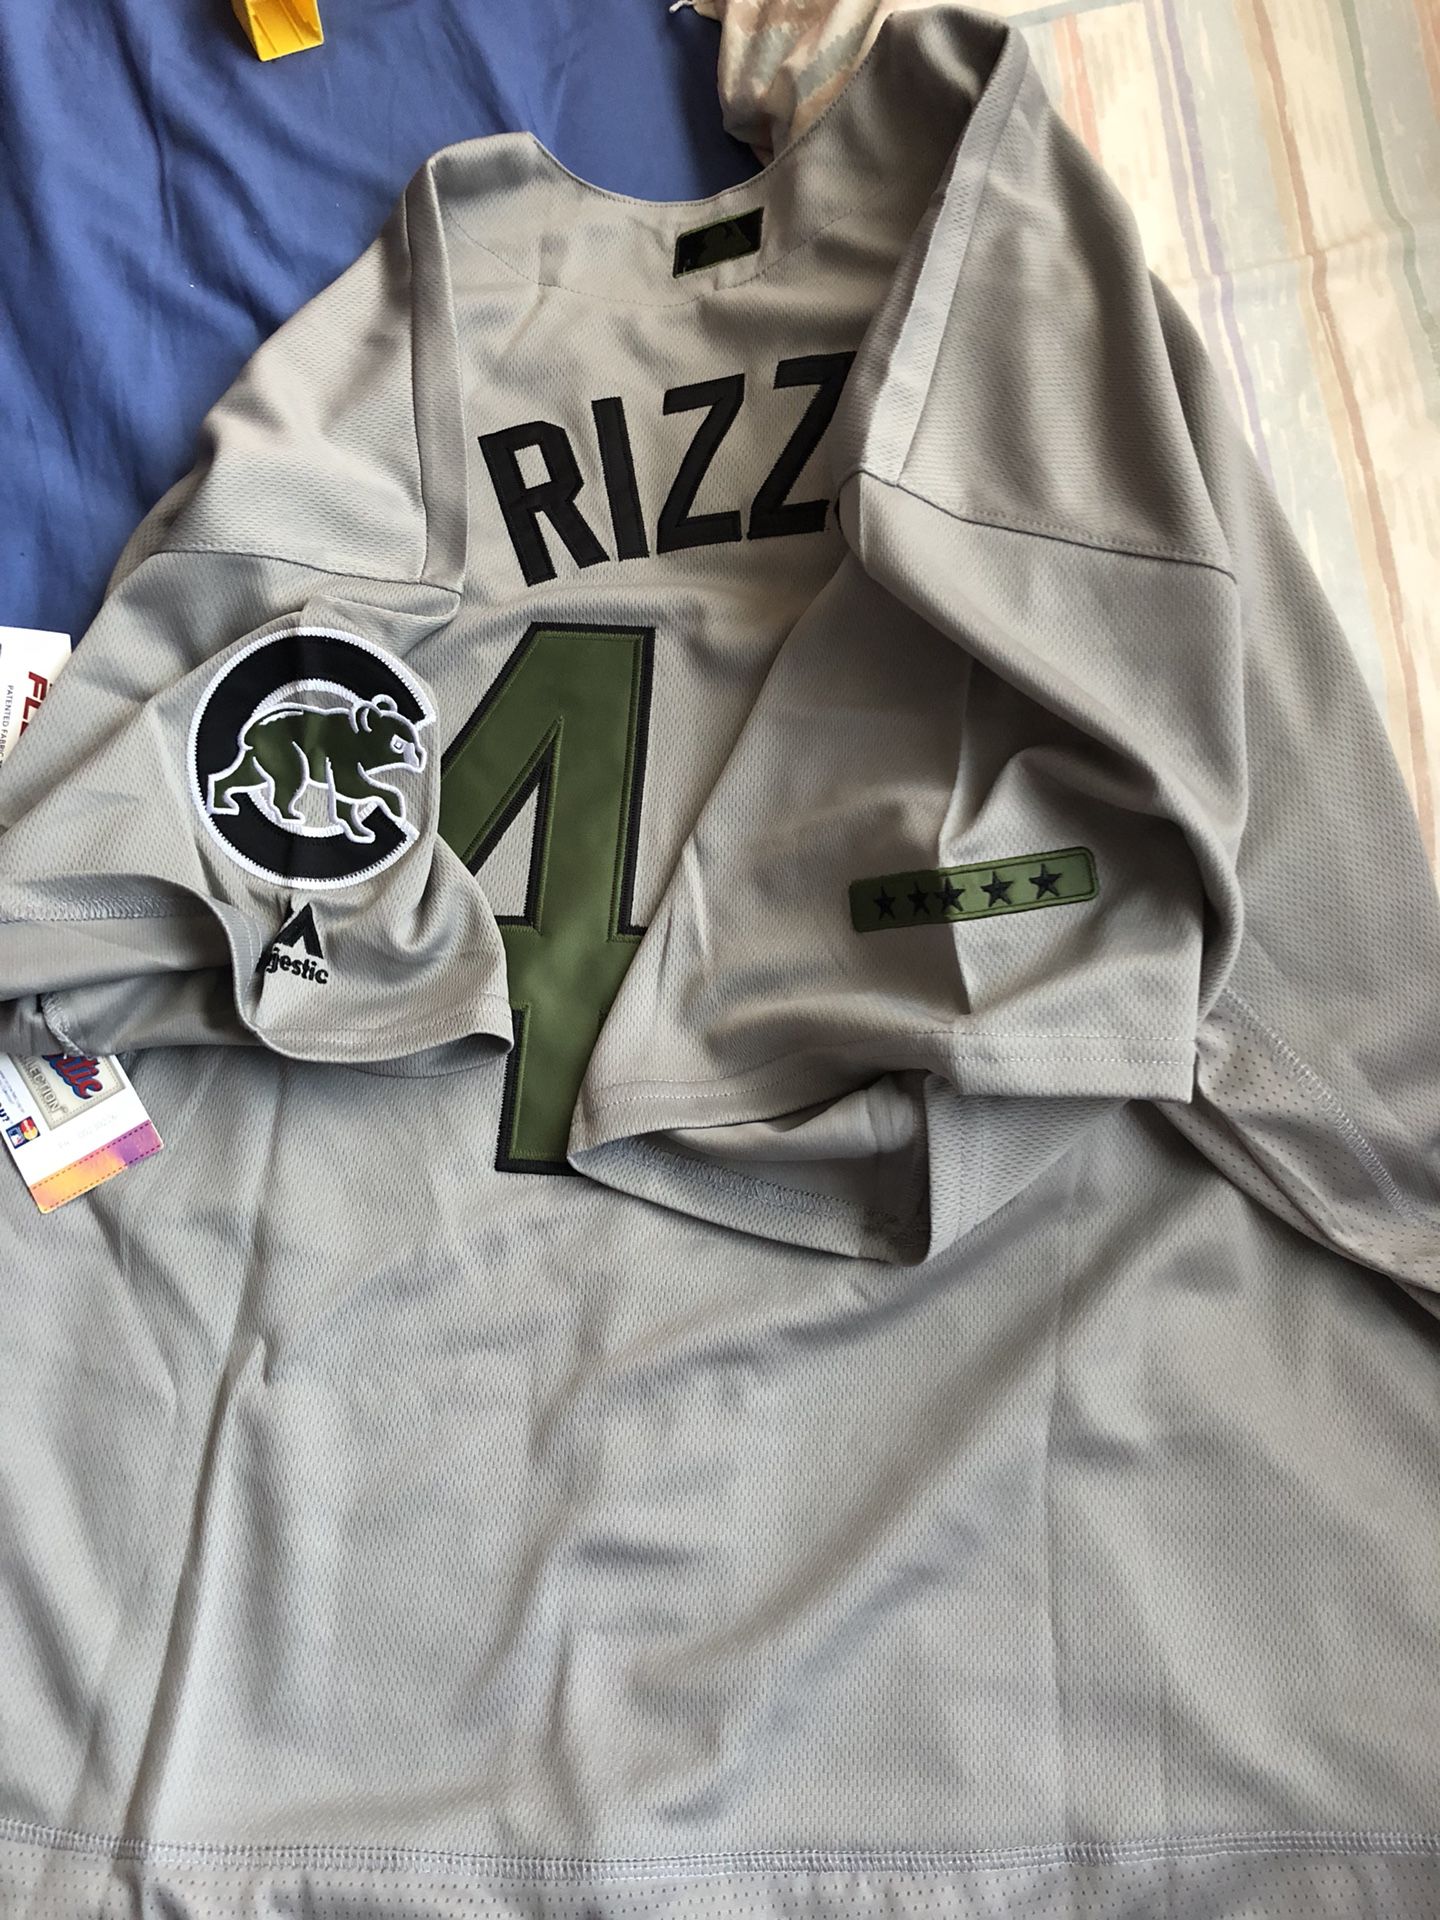 NIB BRAND NEW FUNKO POP MLB CHICAGO CUBS ANTHONY RIZZO #06 GREY AWAY JERSEY  for Sale in Ontarioville, IL - OfferUp